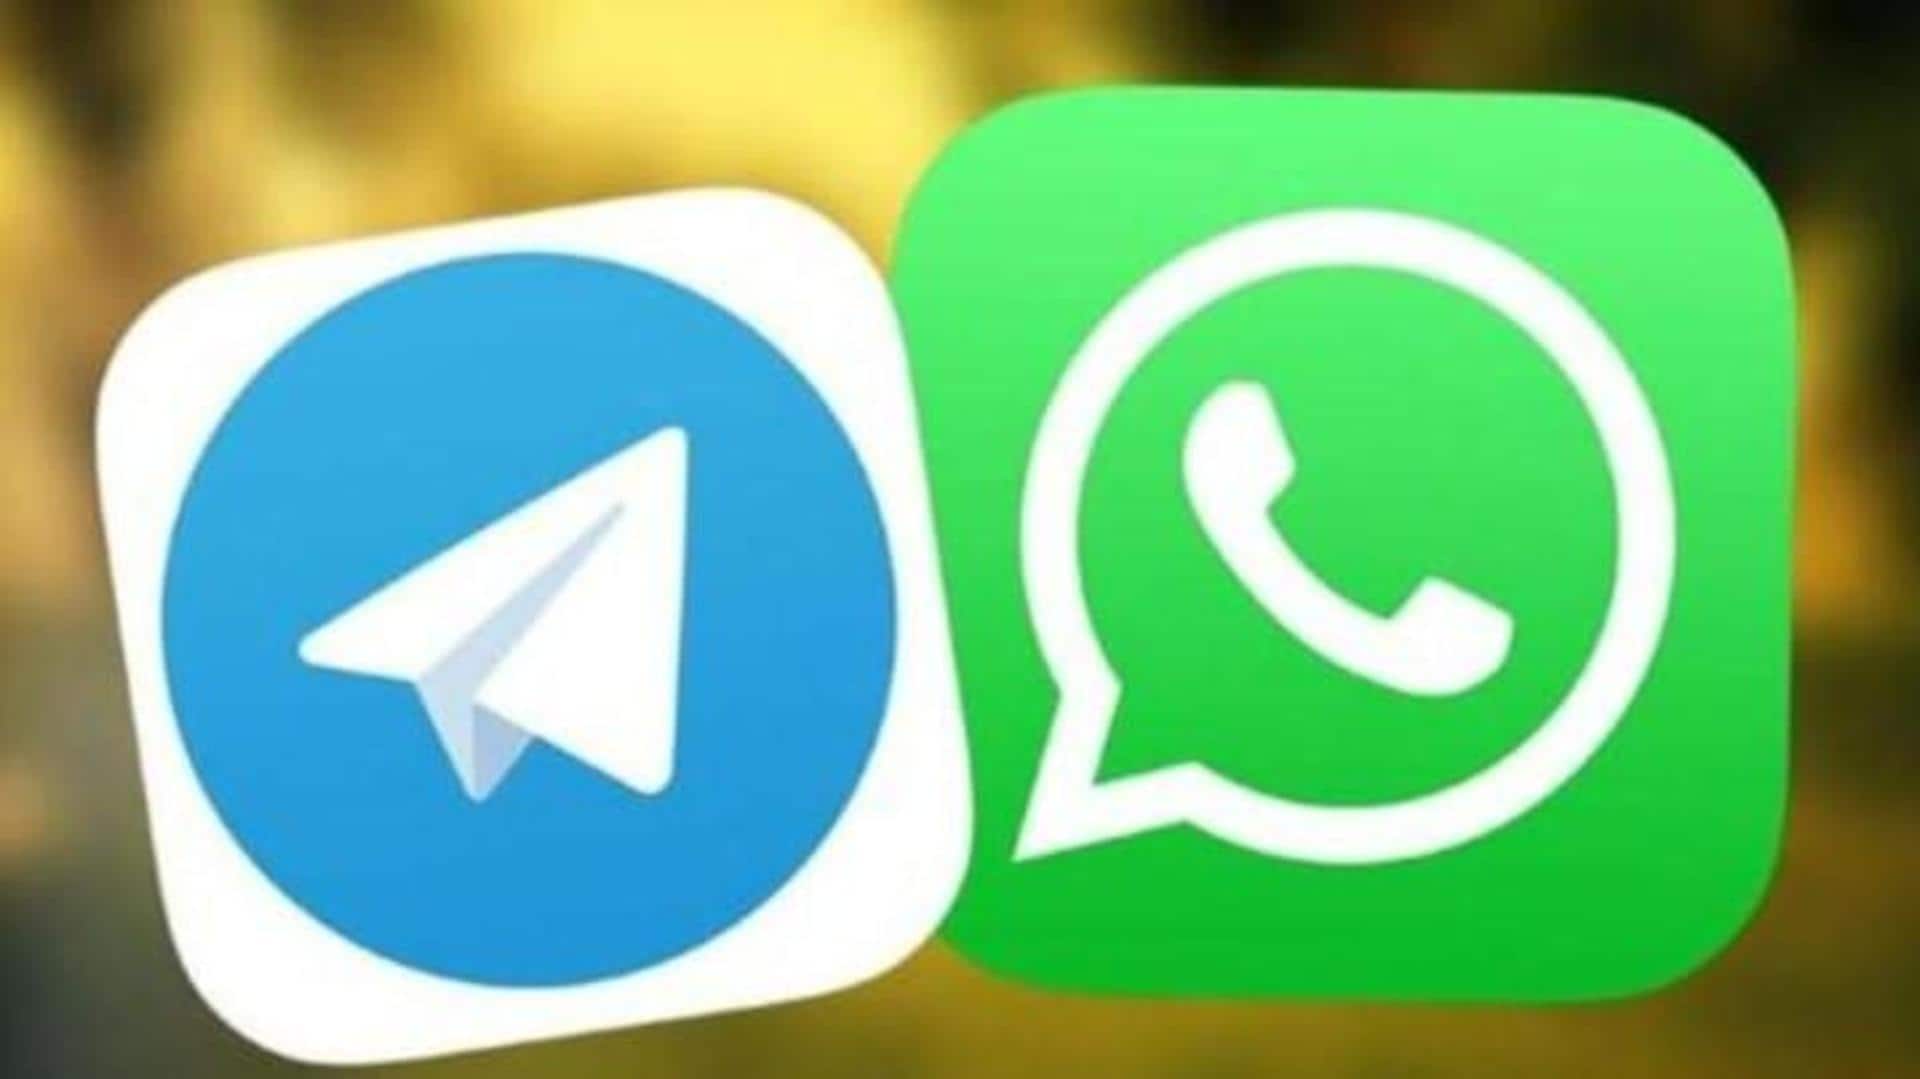 Telegram v/s WhatsApp: Why are the two companies fighting